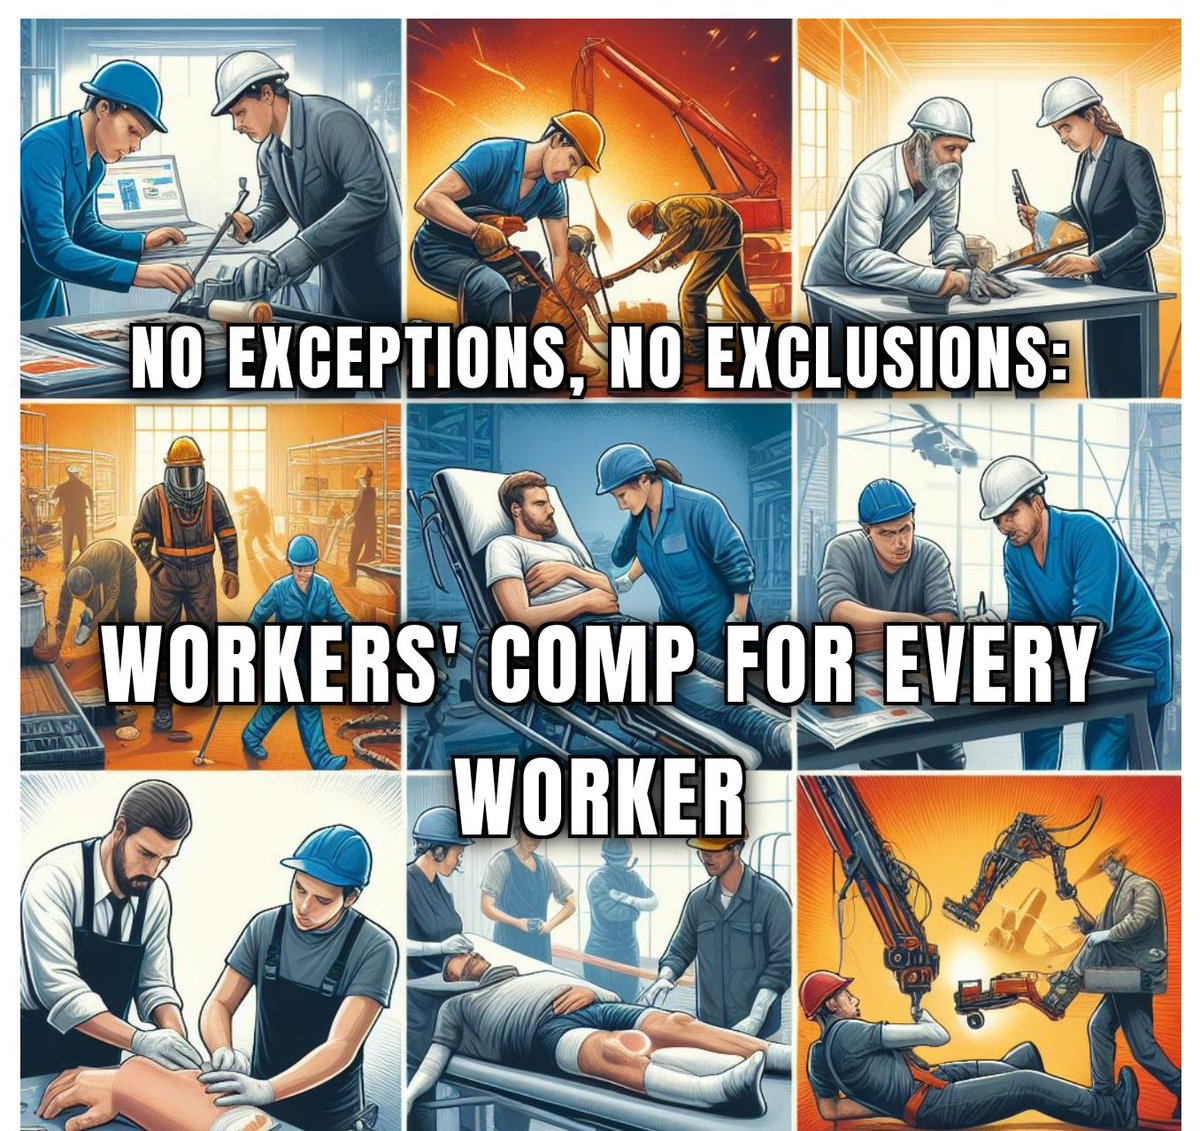 No exceptions! No exclusions! #WorkersComp for every worker!  Let's ensure all workers are protected and supported. #FairTreatment #workersrights #workers #wsib #wcb #injuredworkers